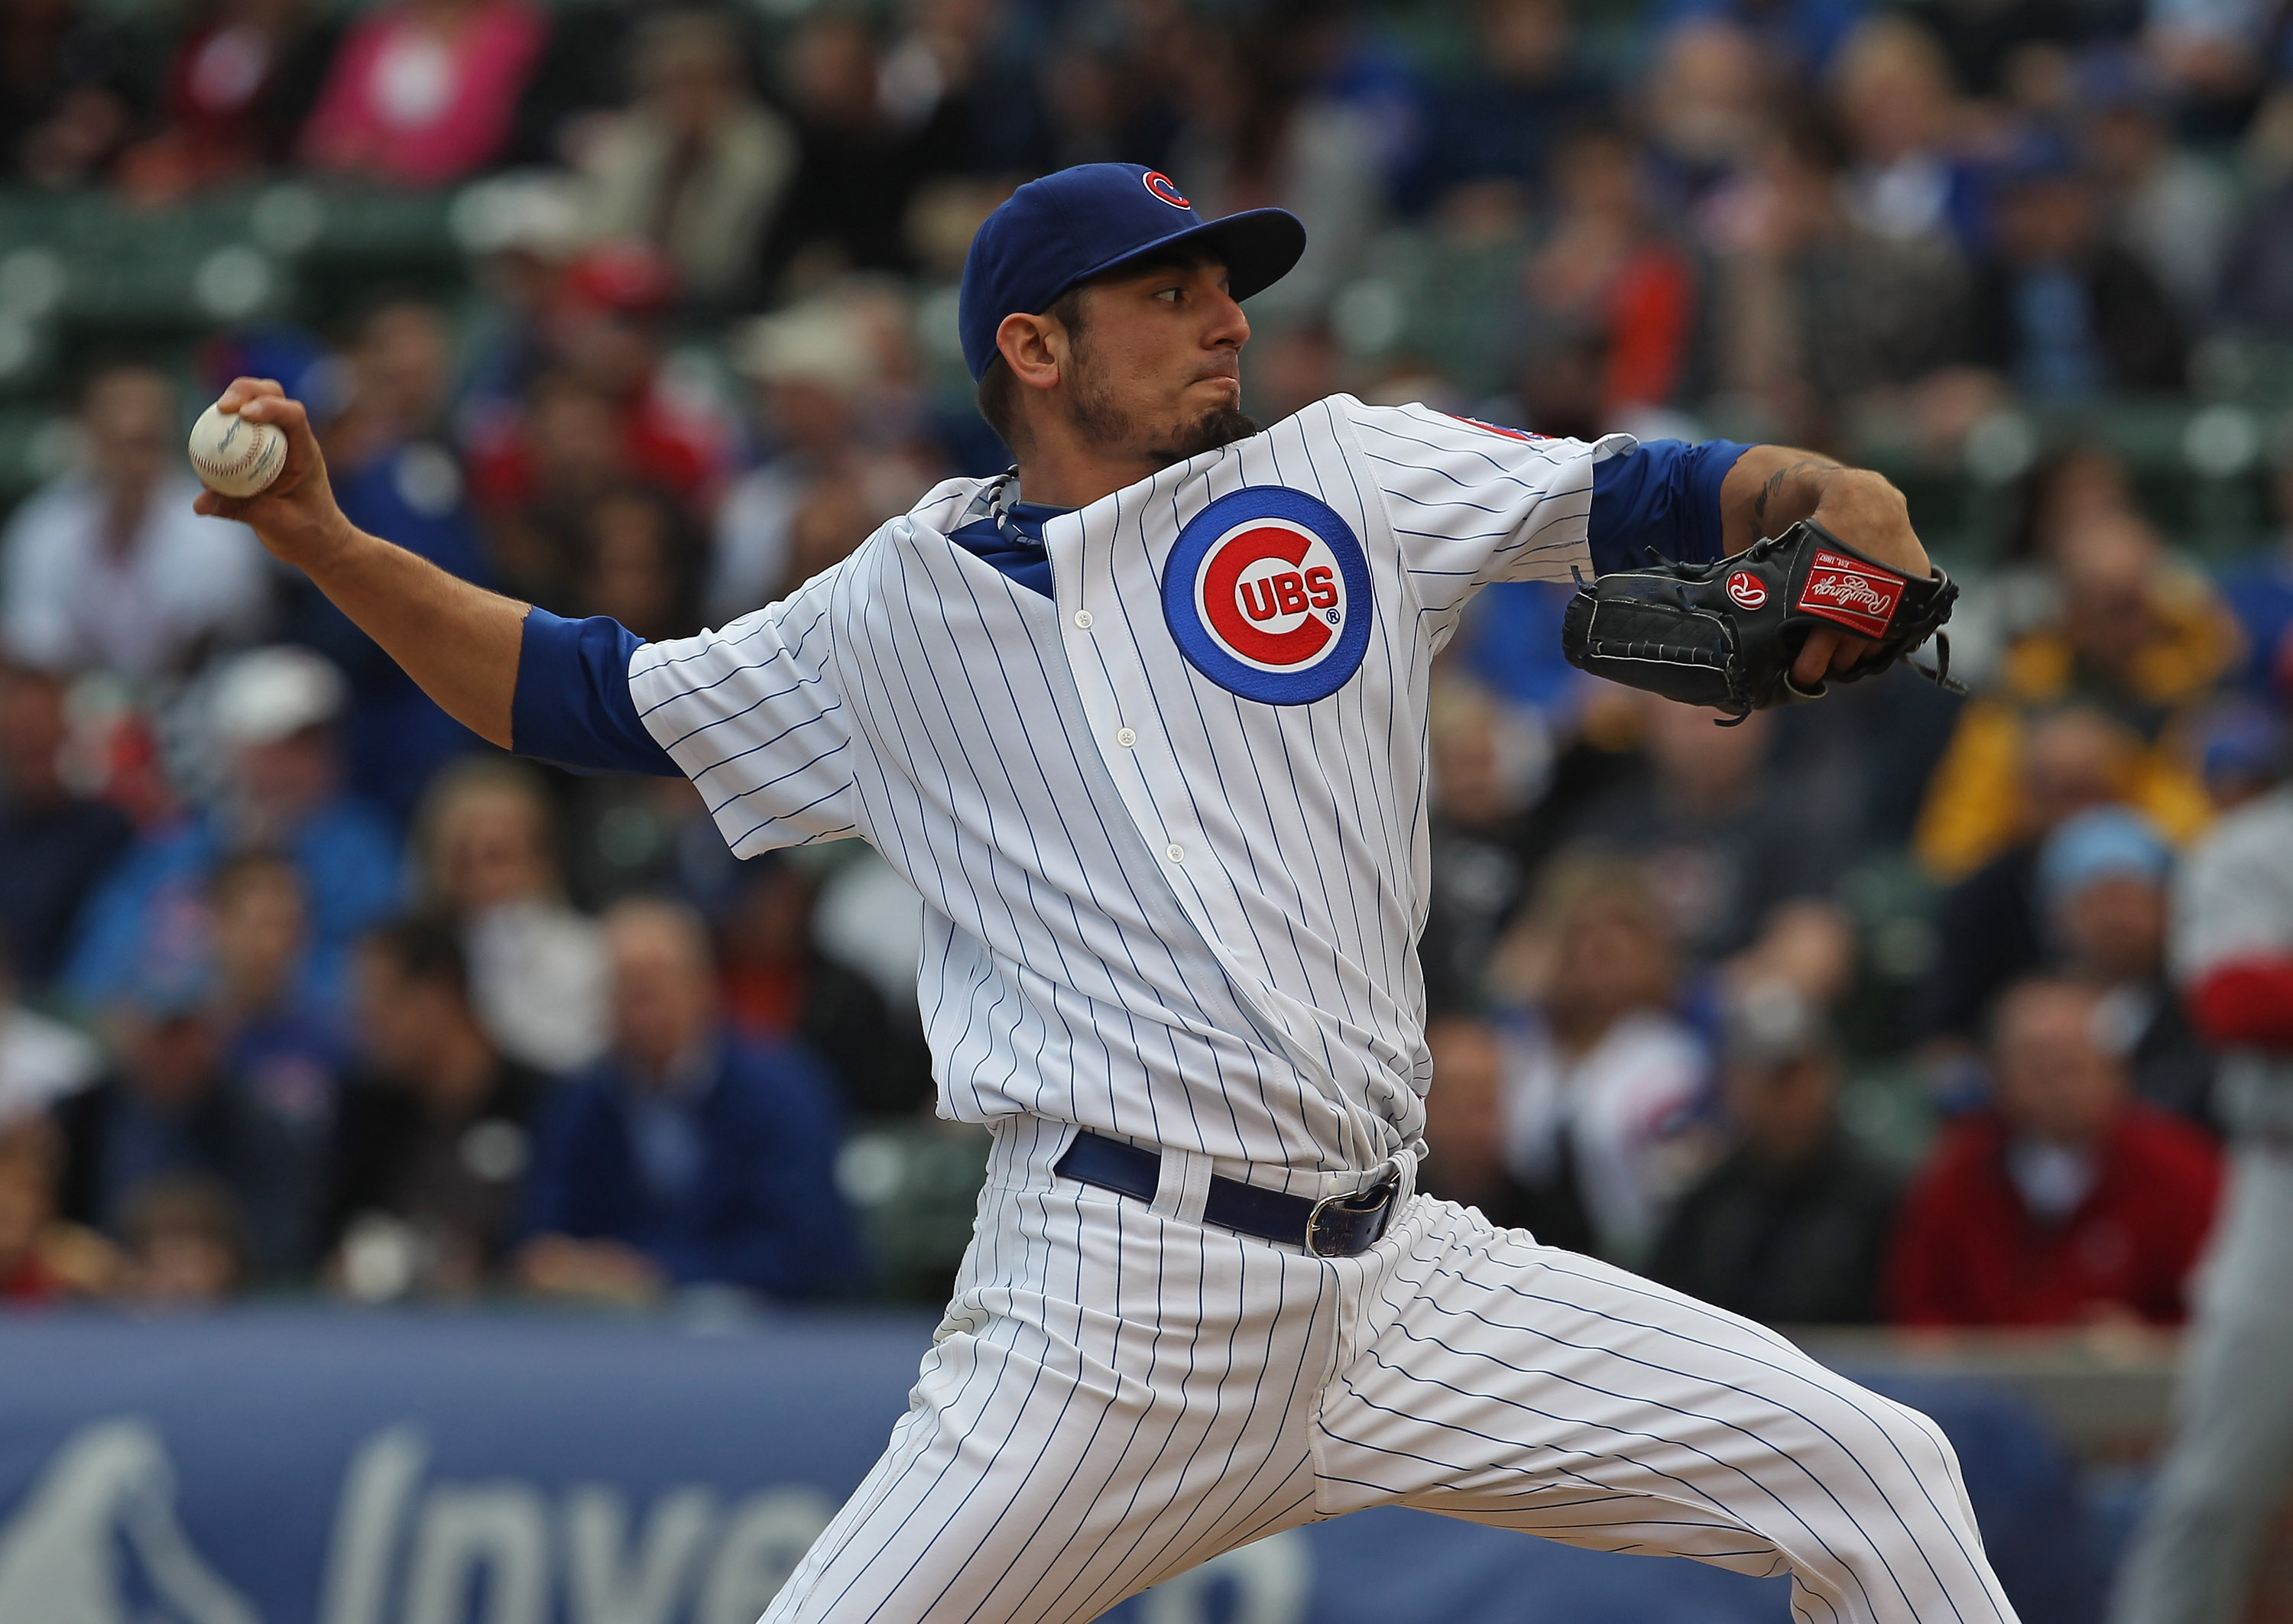 Brighter days are probably ahead for Matt Garza and the Cubs.